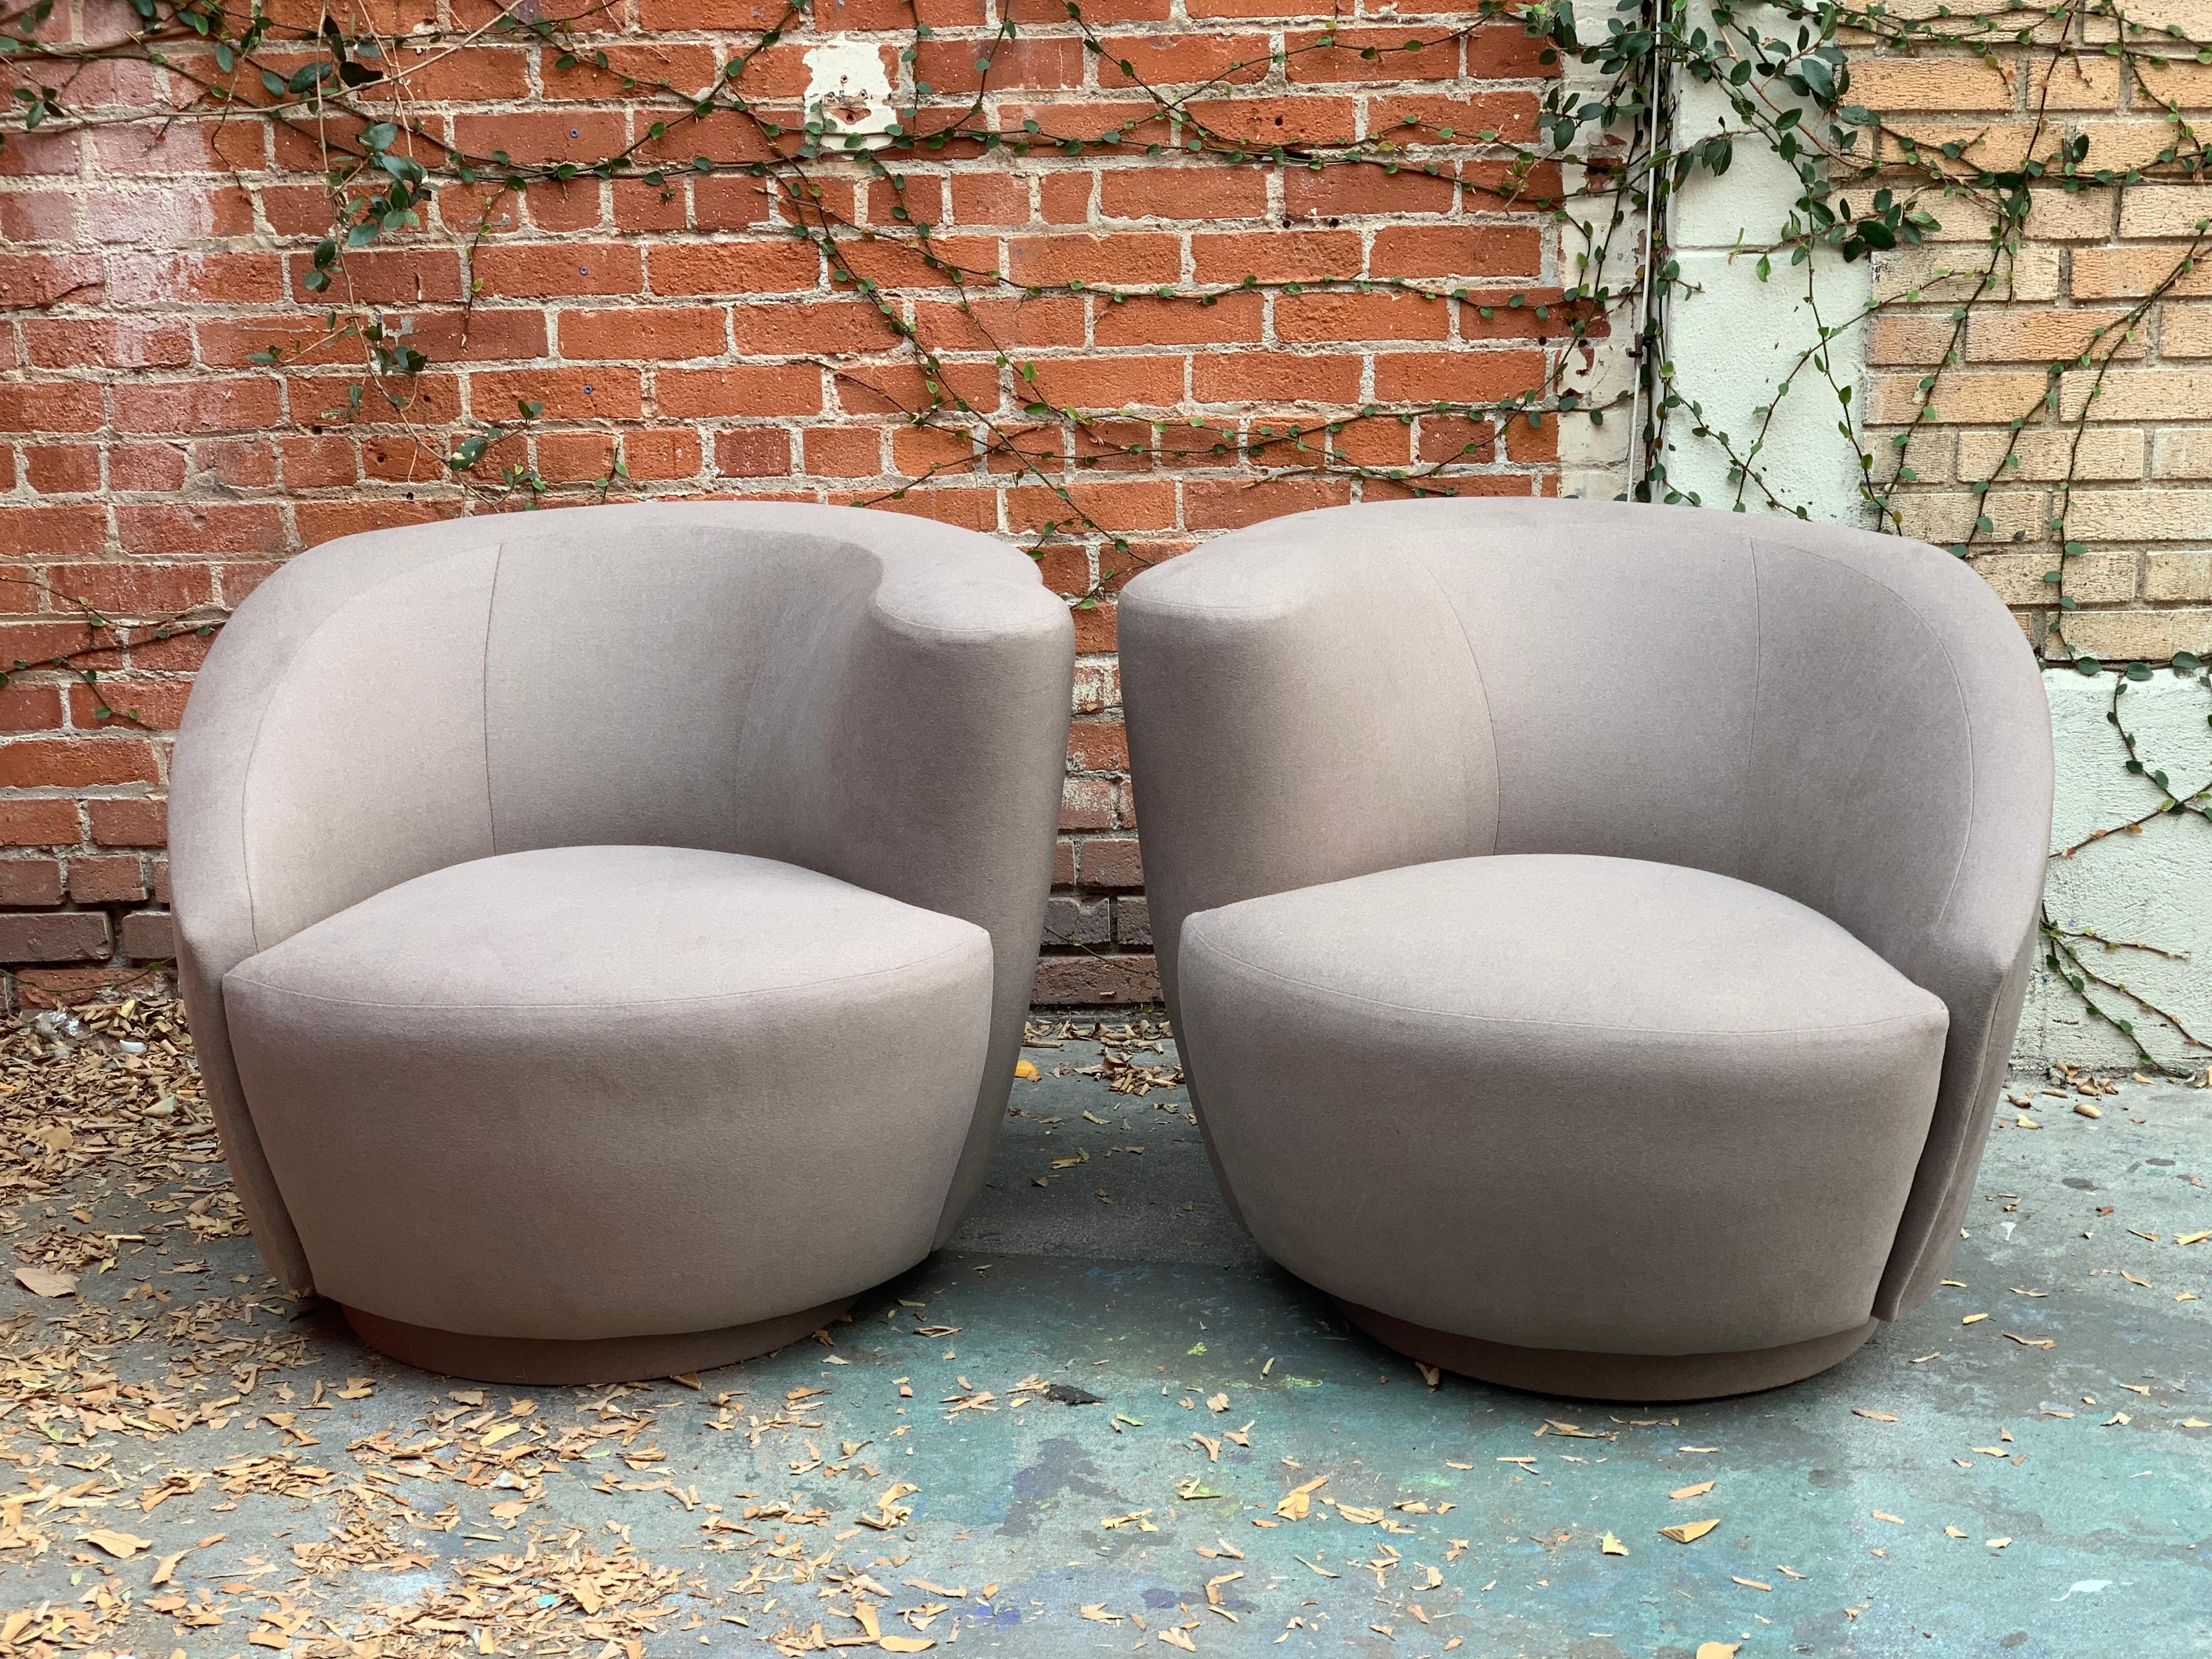 Vintage circa 1970s swivel parlor chairs upholstered in light grey wool.
True to color image of fabric shown in last image, recently reupholstered.

Measure: 21